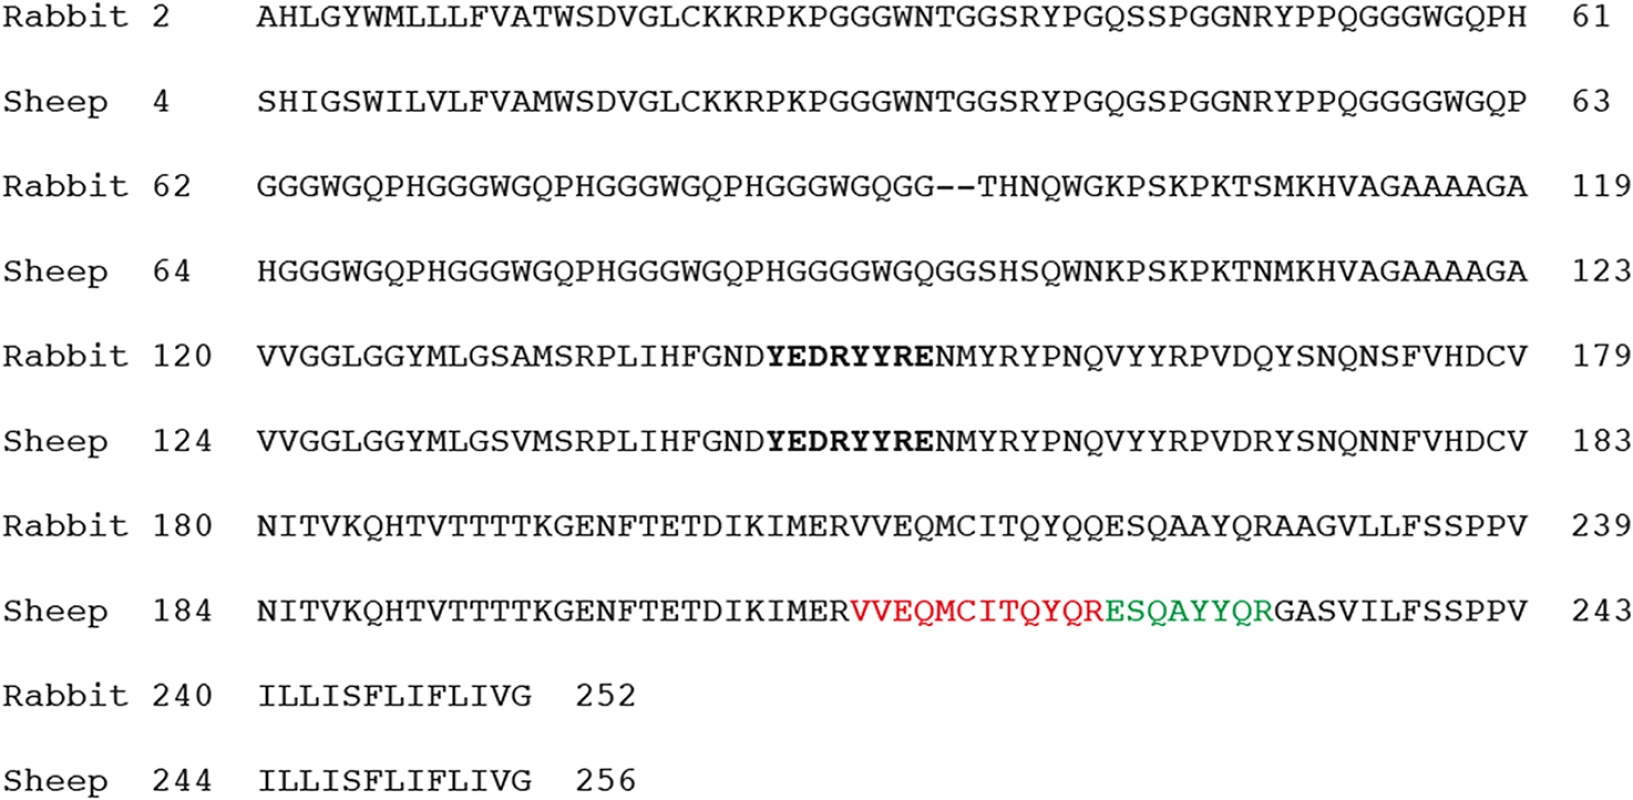 PrP amino acid sequences from New Zealand White rabbit and the sheep (VRQ allele).